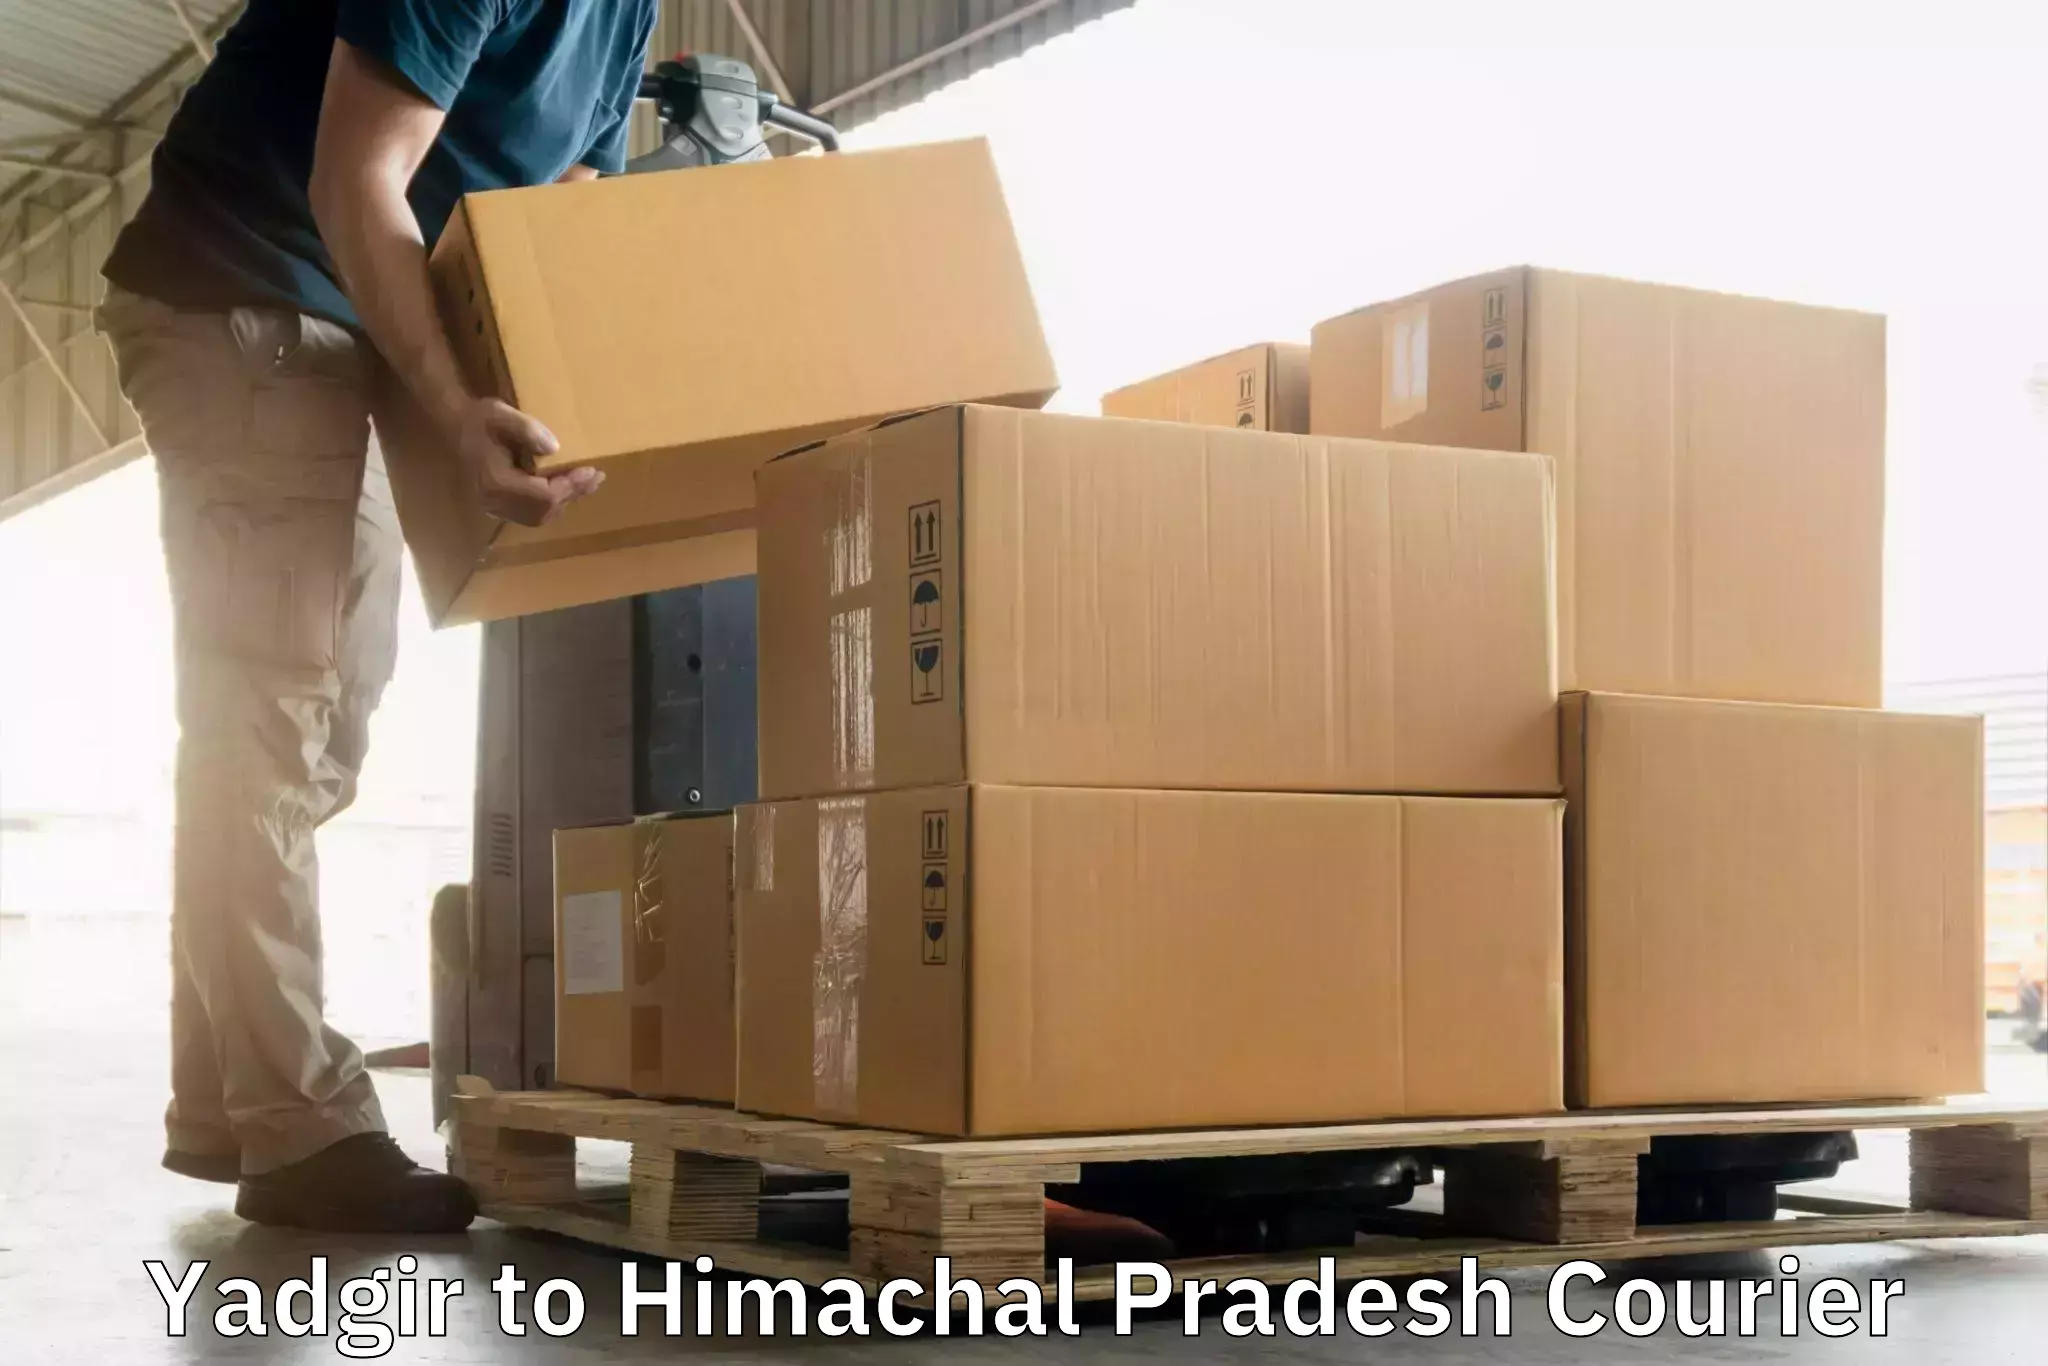 Cost-effective courier options Yadgir to YS Parmar University of Horticulture and Forestry Solan